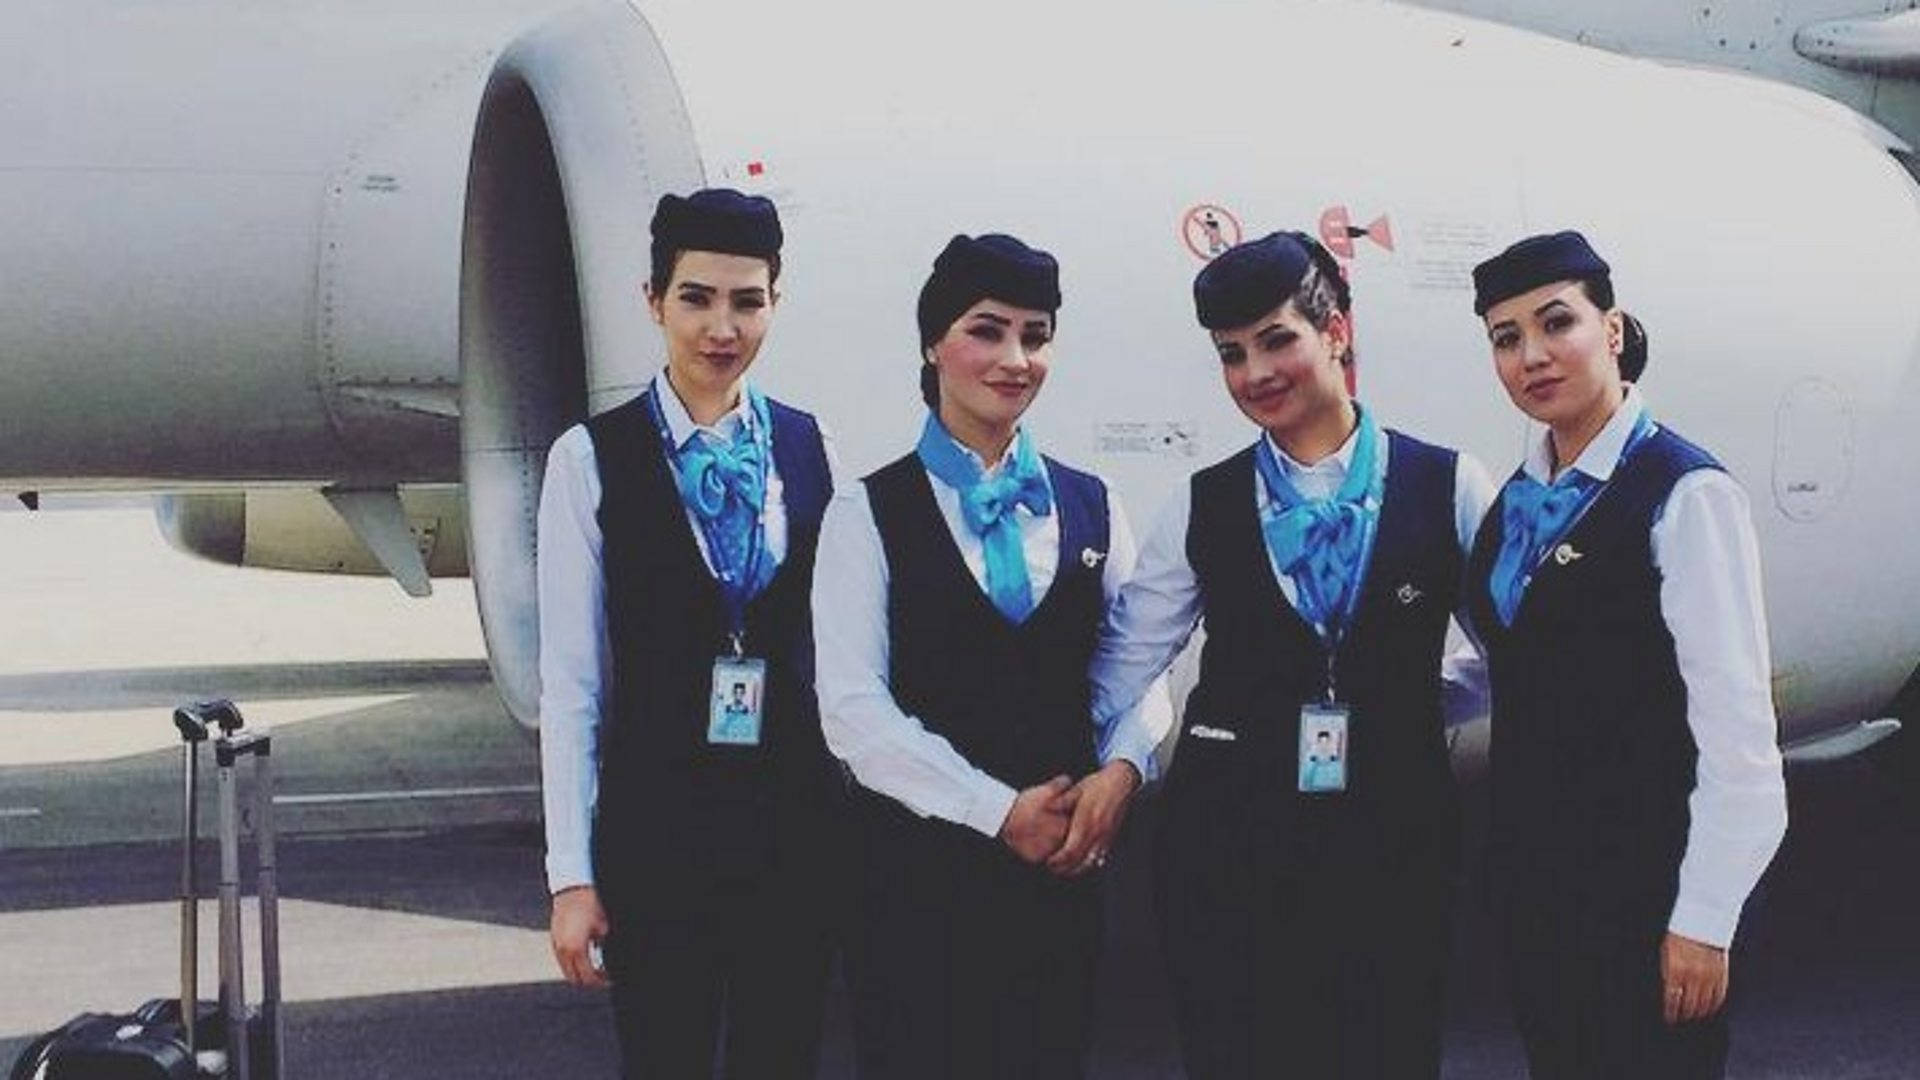 Ariana Afghan Airlines Flight Attendants on Duty Wallpaper